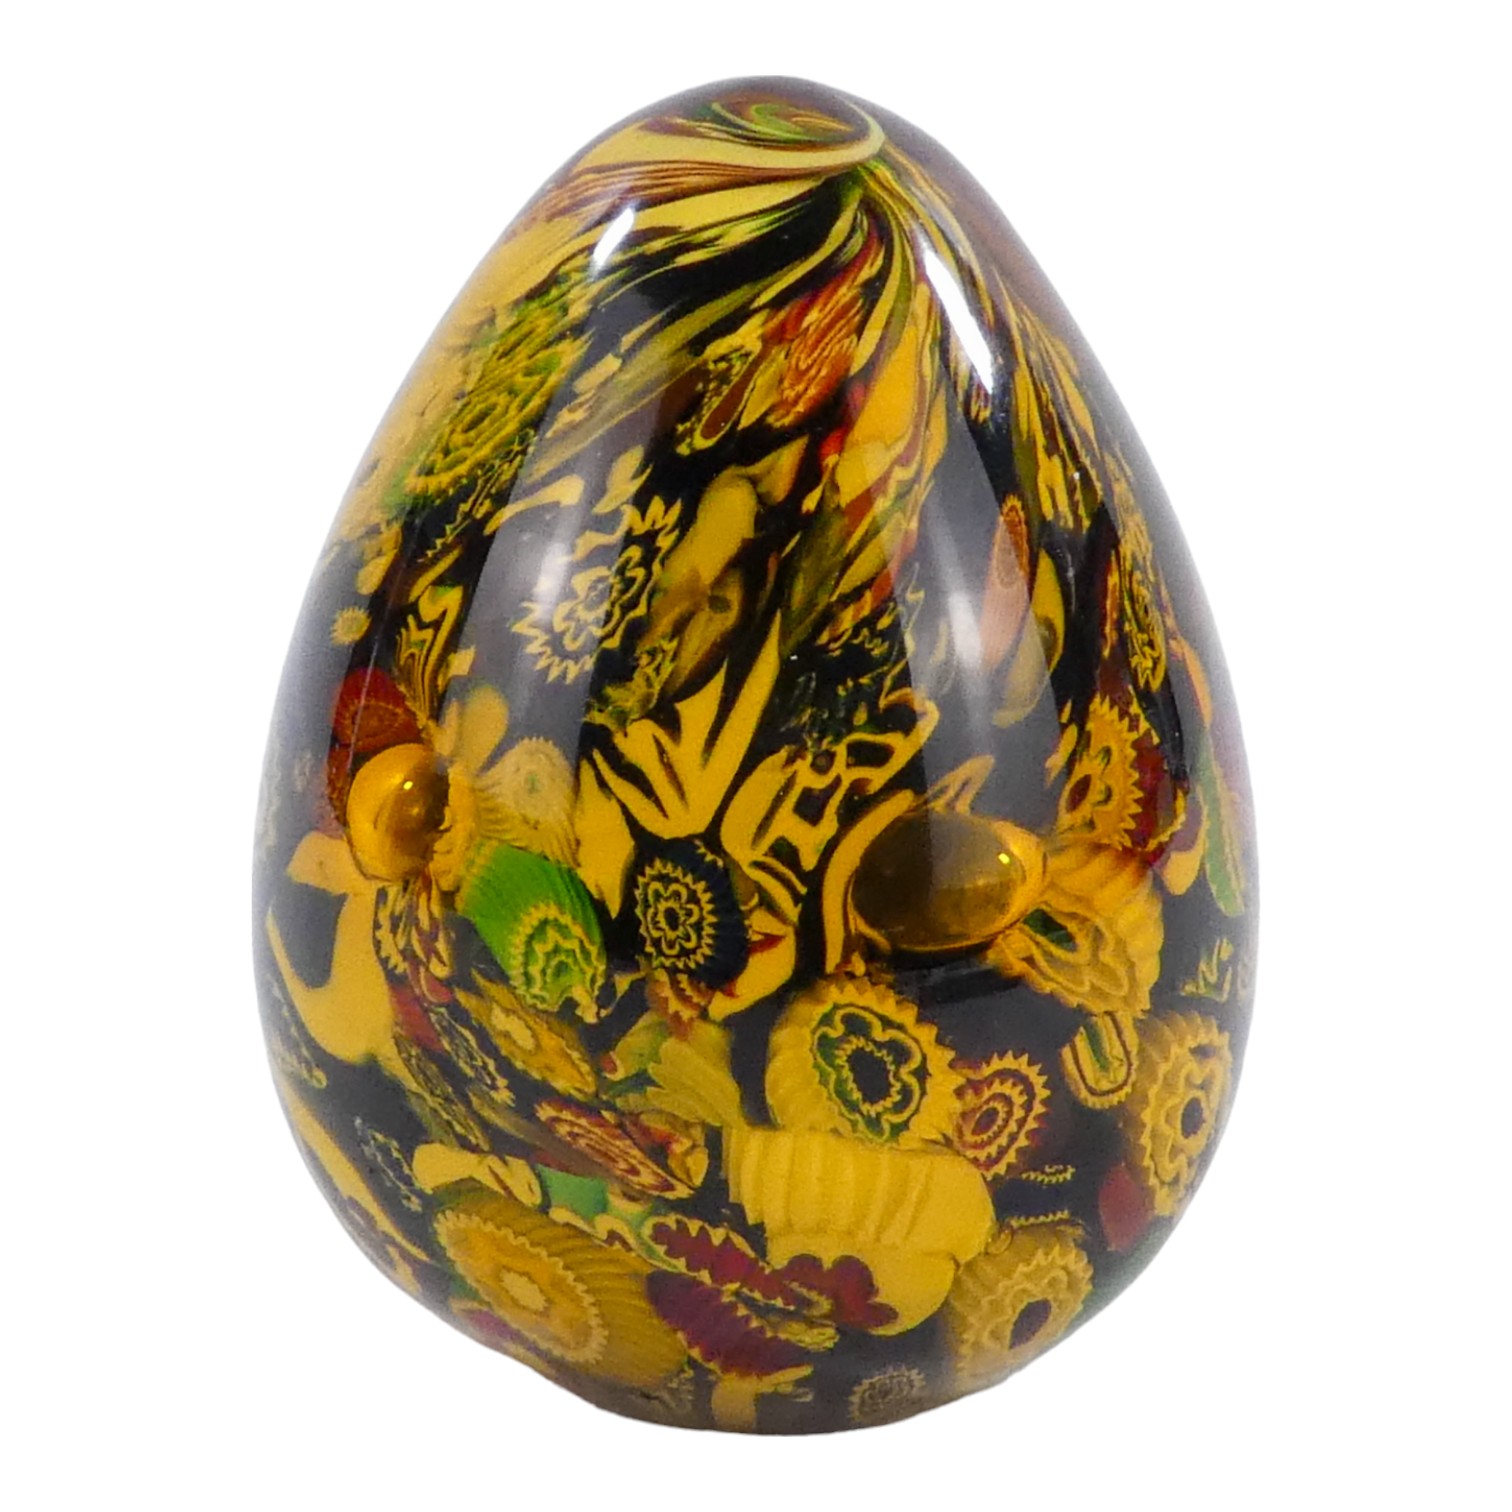 A Murano glass oviform paperweight - a collection of decorative canes with amber glass, height